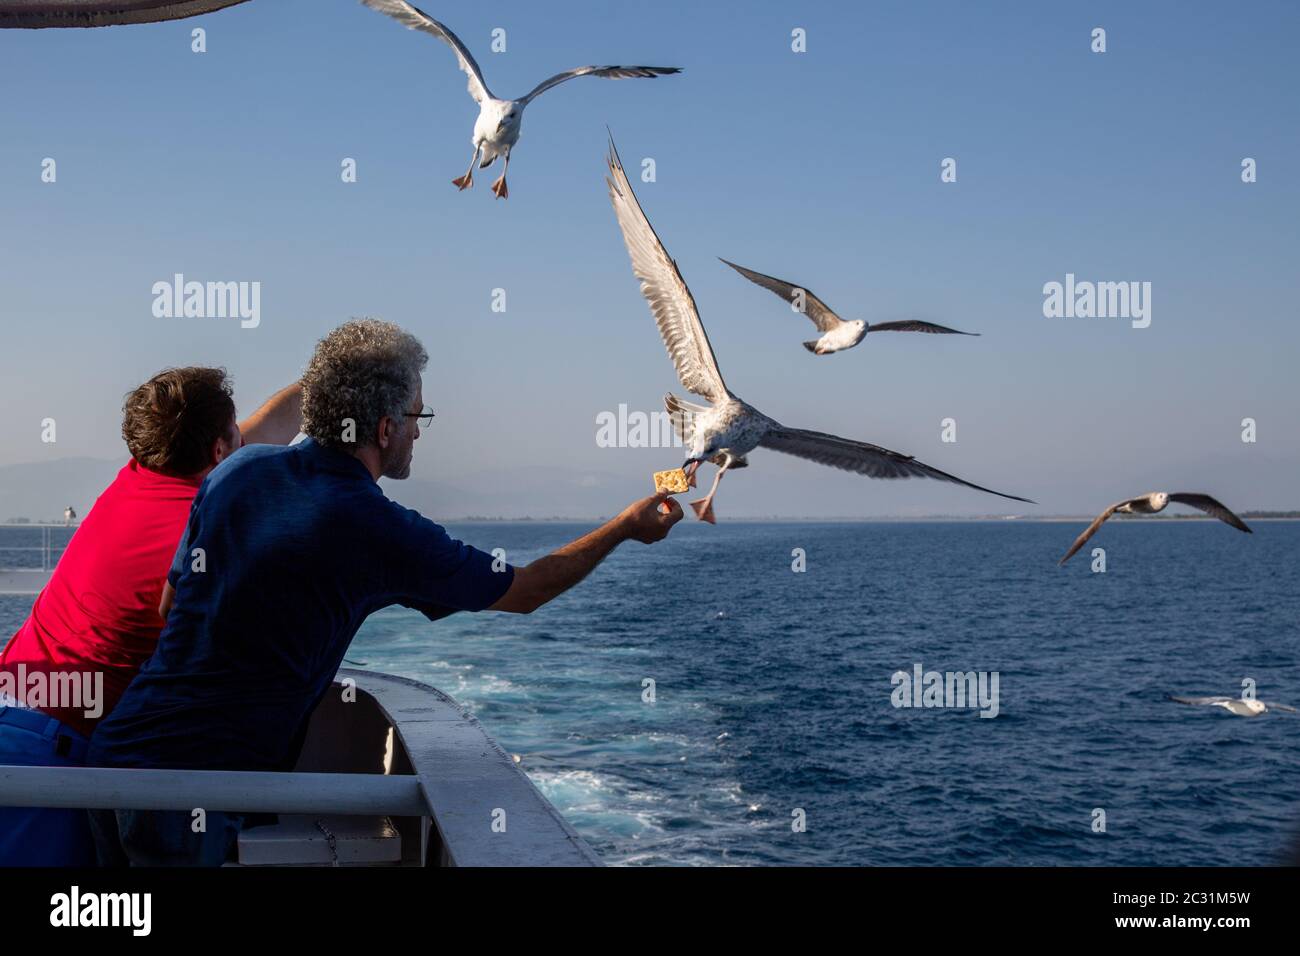 Thassos / Greece - 10.28.2015: Men offering food to seagulls from the deck of an island ferry, seagull catching the cracker, blue calm sea in the back Stock Photo